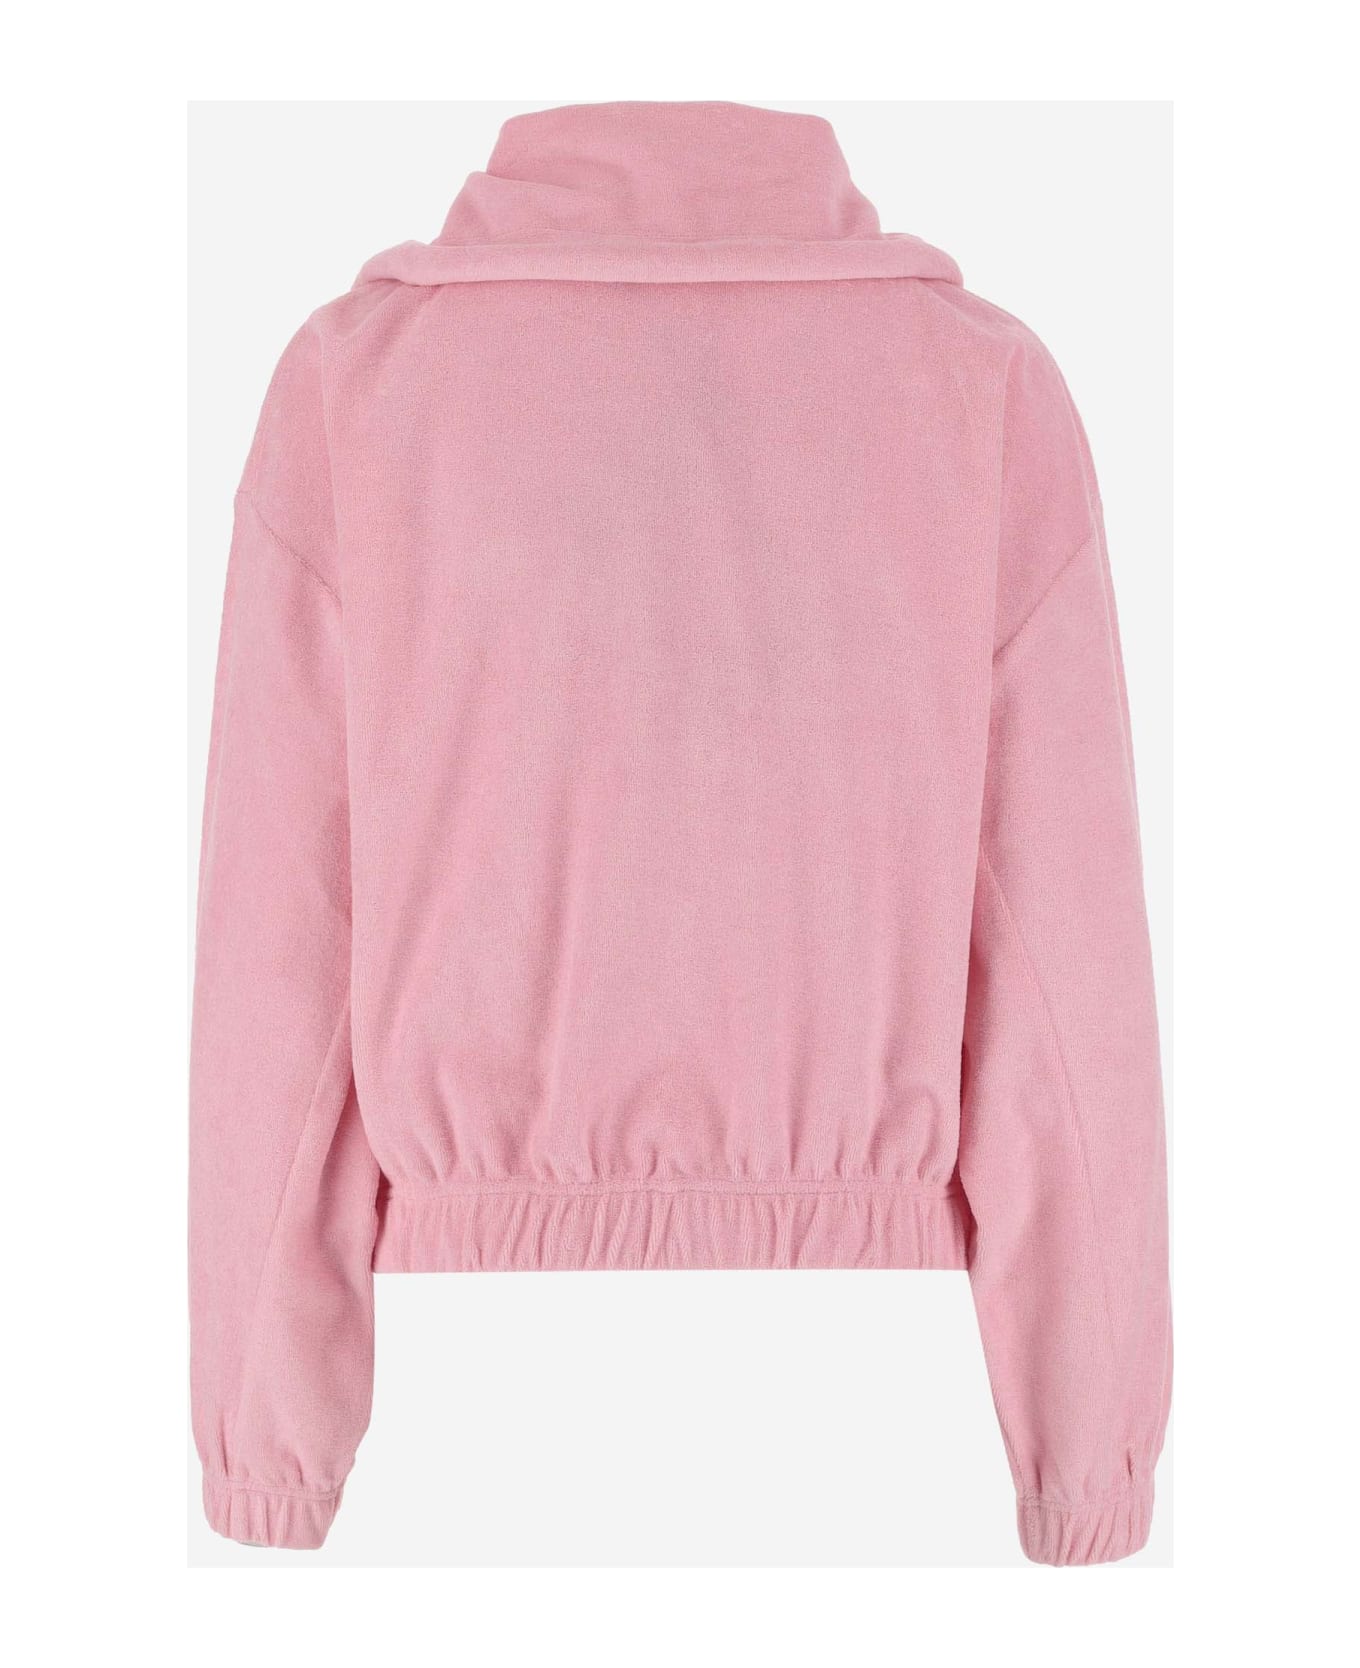 Patou Cotton Sweatshirt With Embossed Patou Signature - Pink